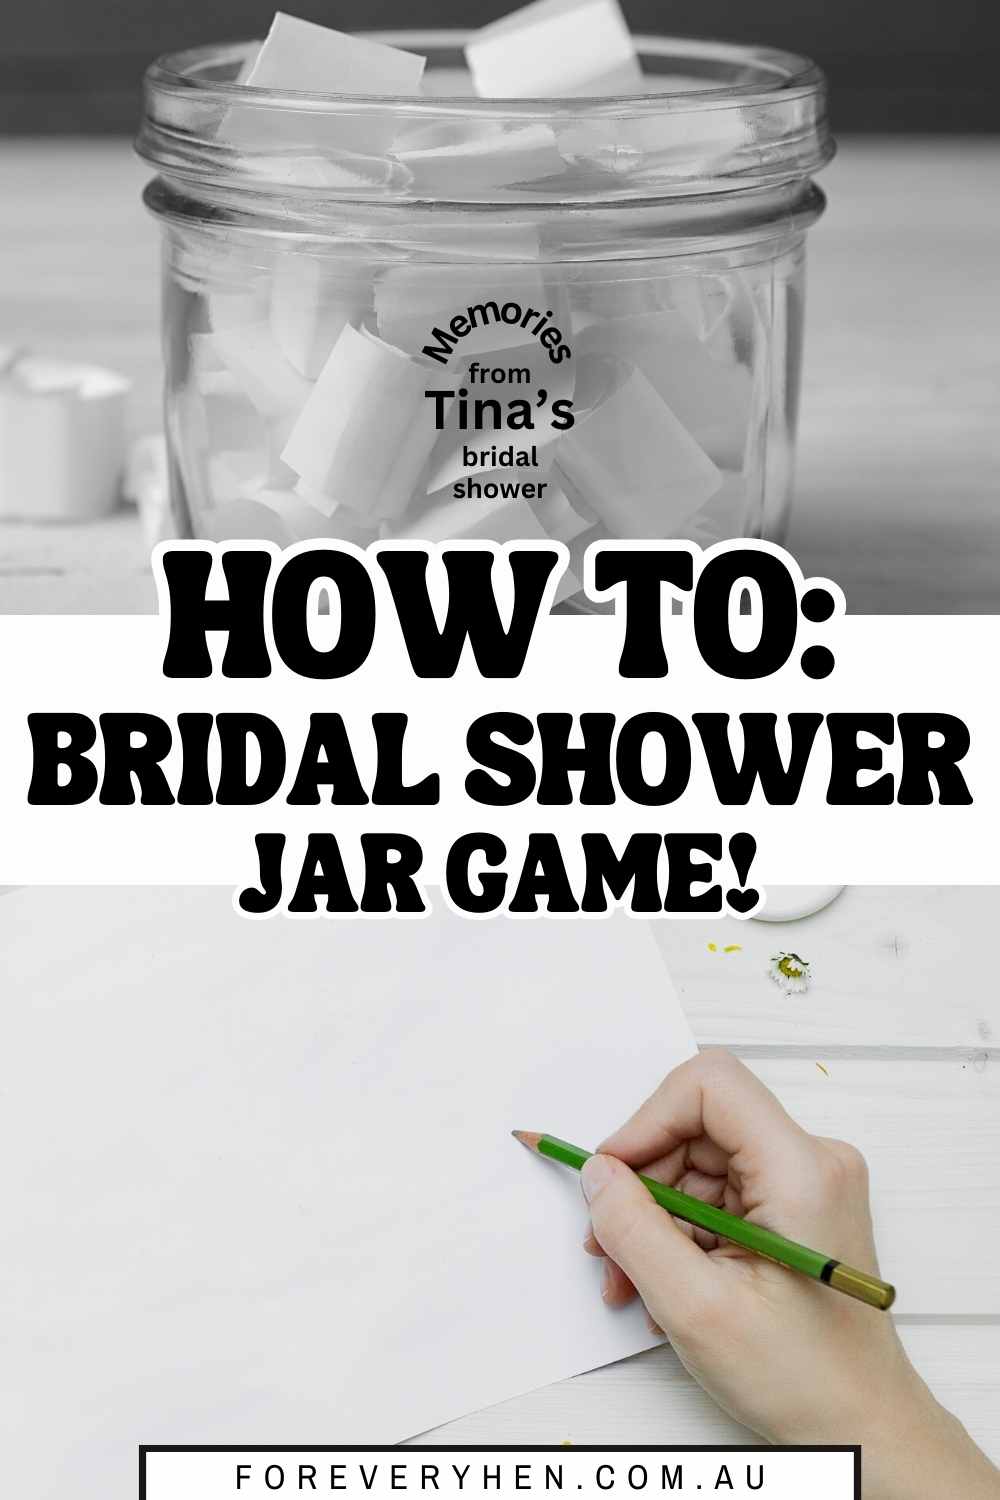 Image of an empty jar. Text overlay: Looking for bridal shower games? It's time to play... the jar!